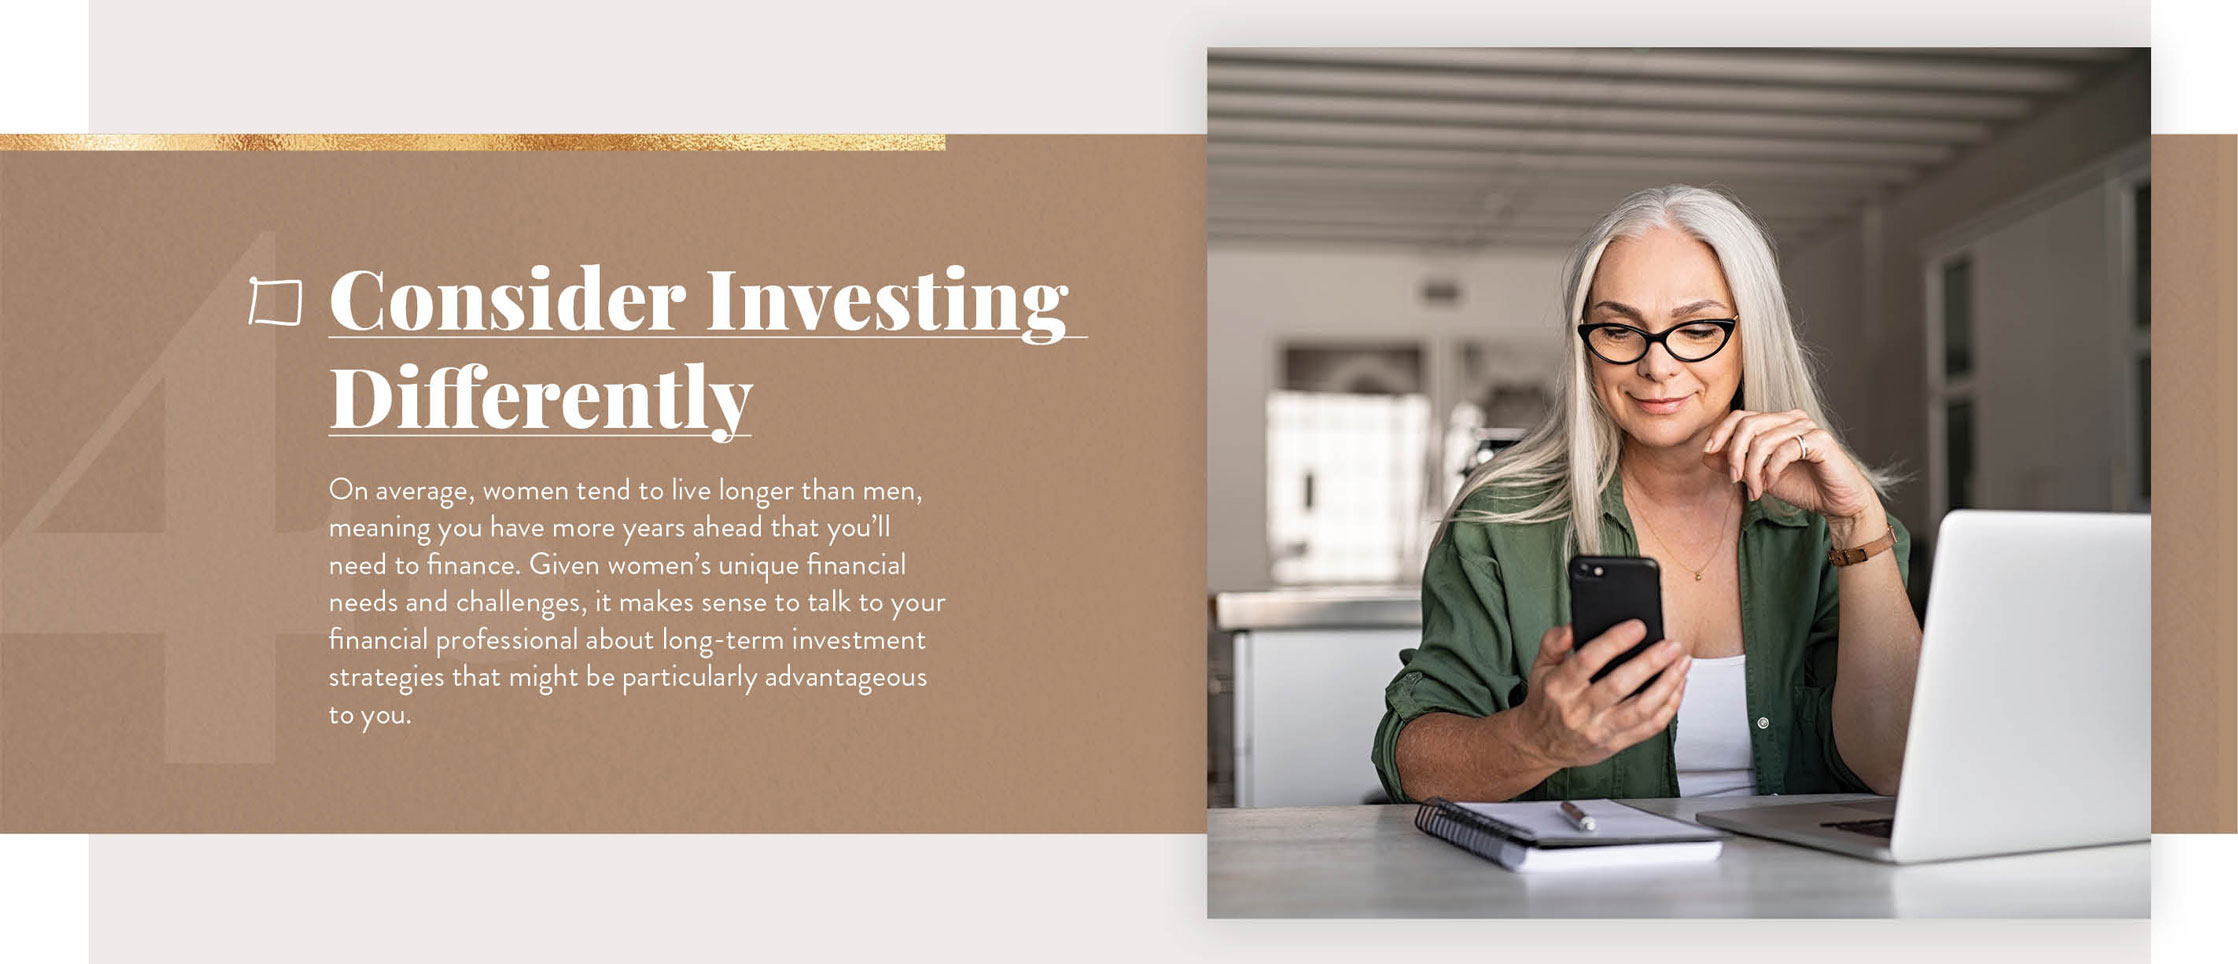 Consider Investing Differently. On average, women tend to live longer than men, meaning you have more years ahead that you’ll need to finance. Given women’s unique financial needs and challenges, it makes sense to talk to your financial professional about long-term investment strategies that might be particularly advantageous to you.